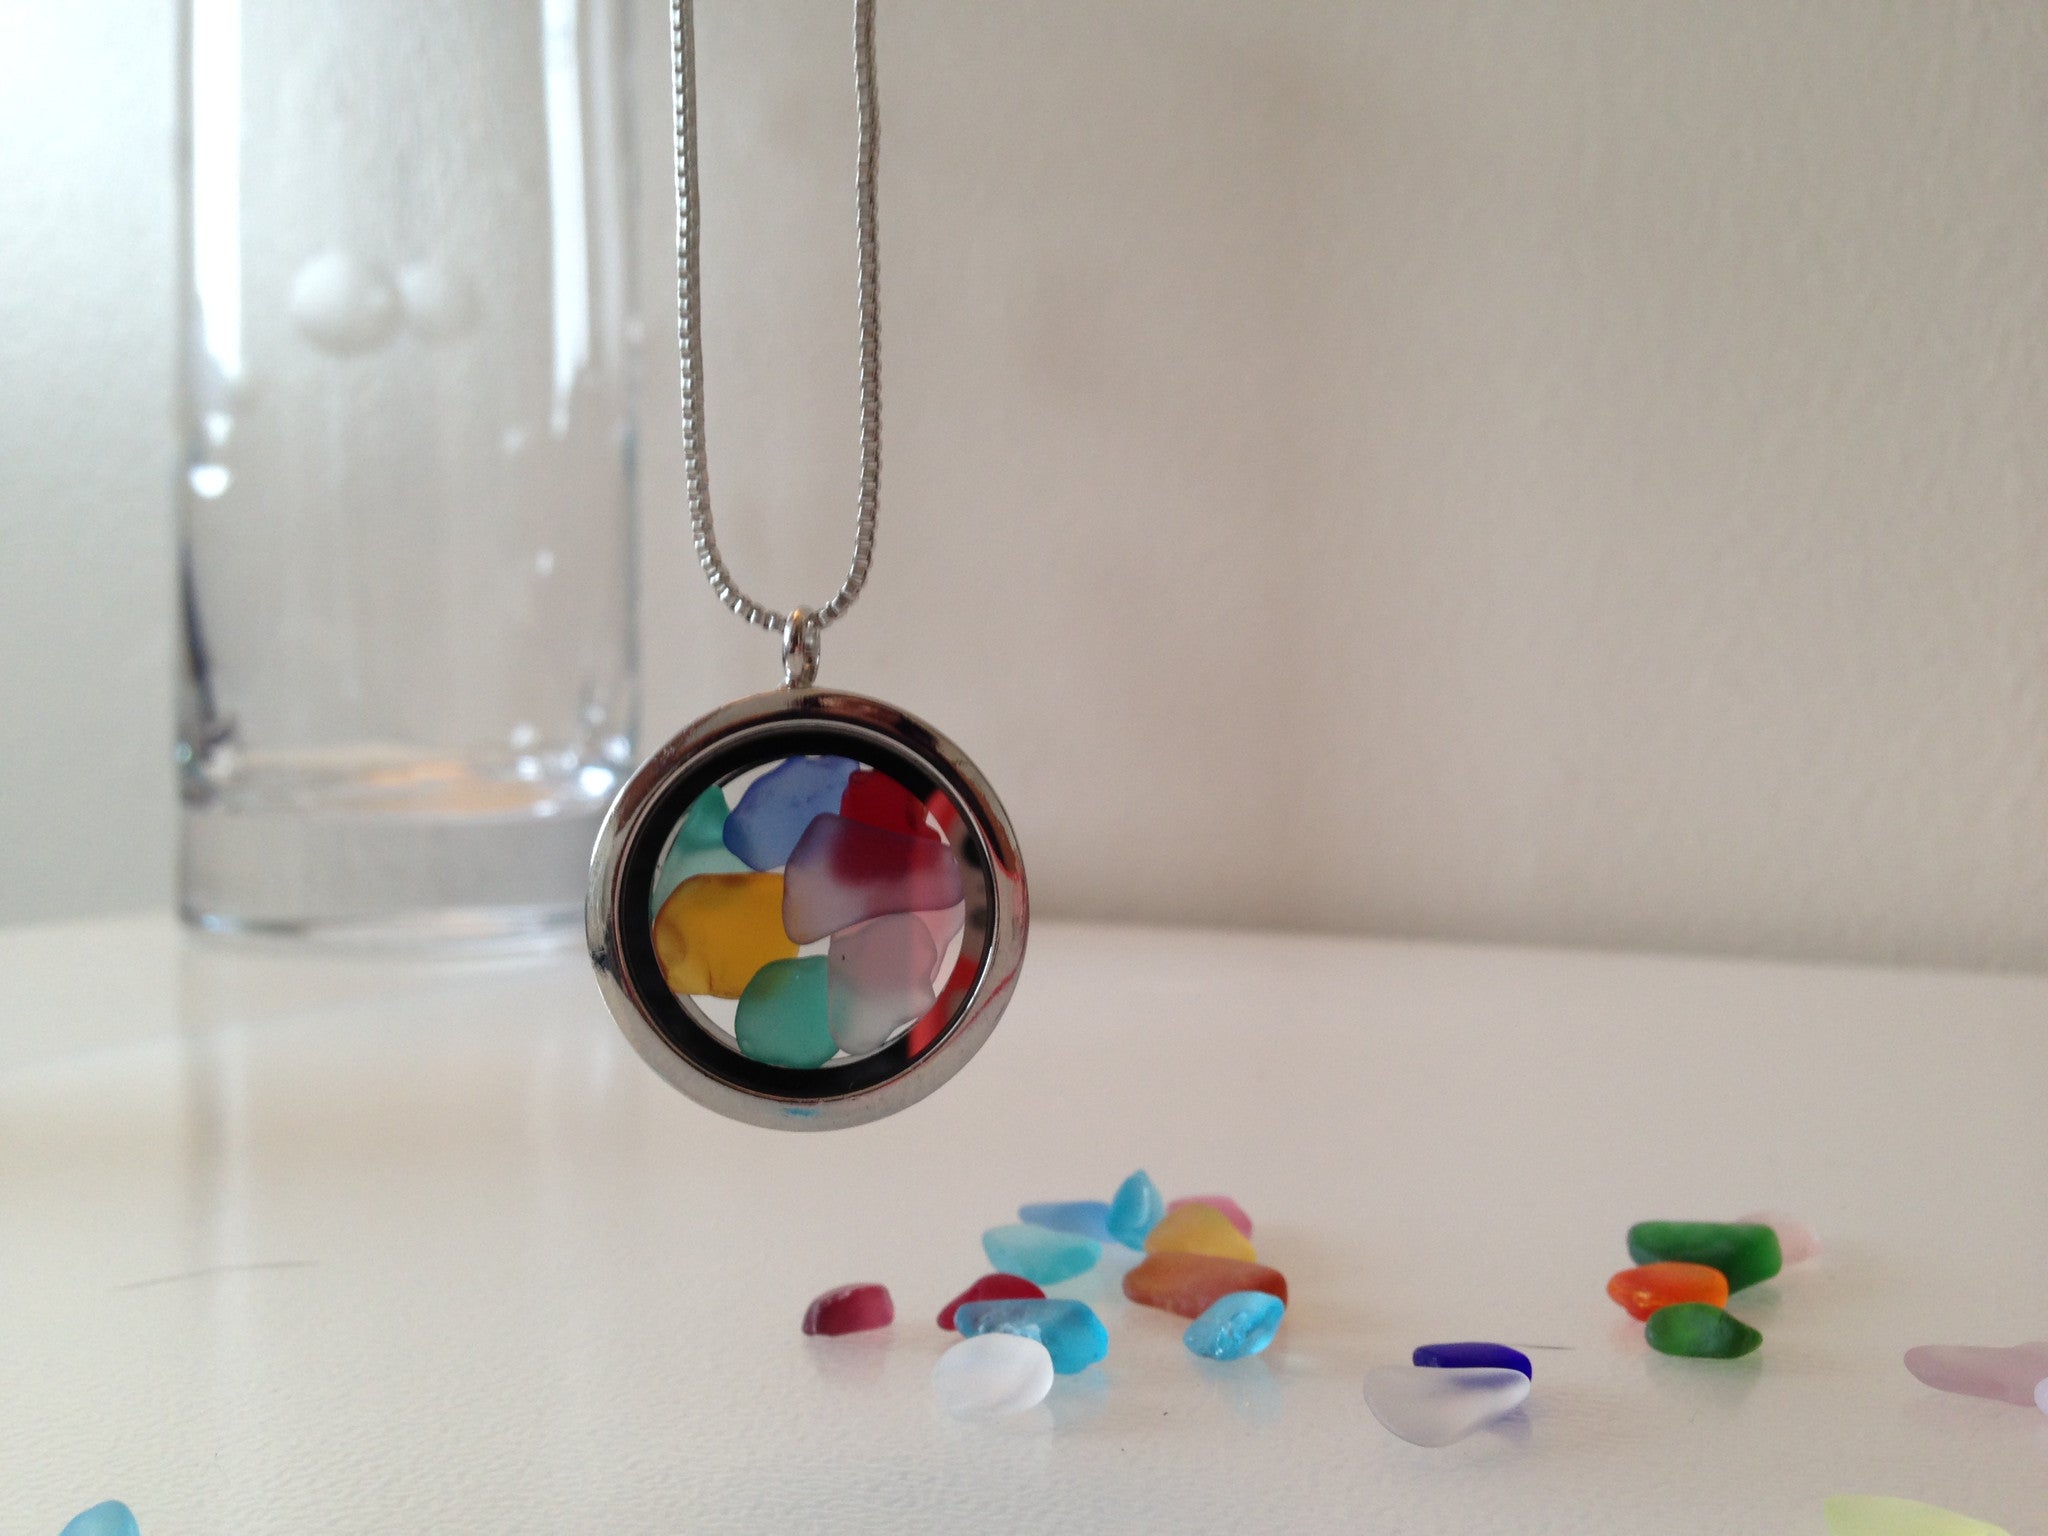 Rockit! Candy Seaglass Necklace